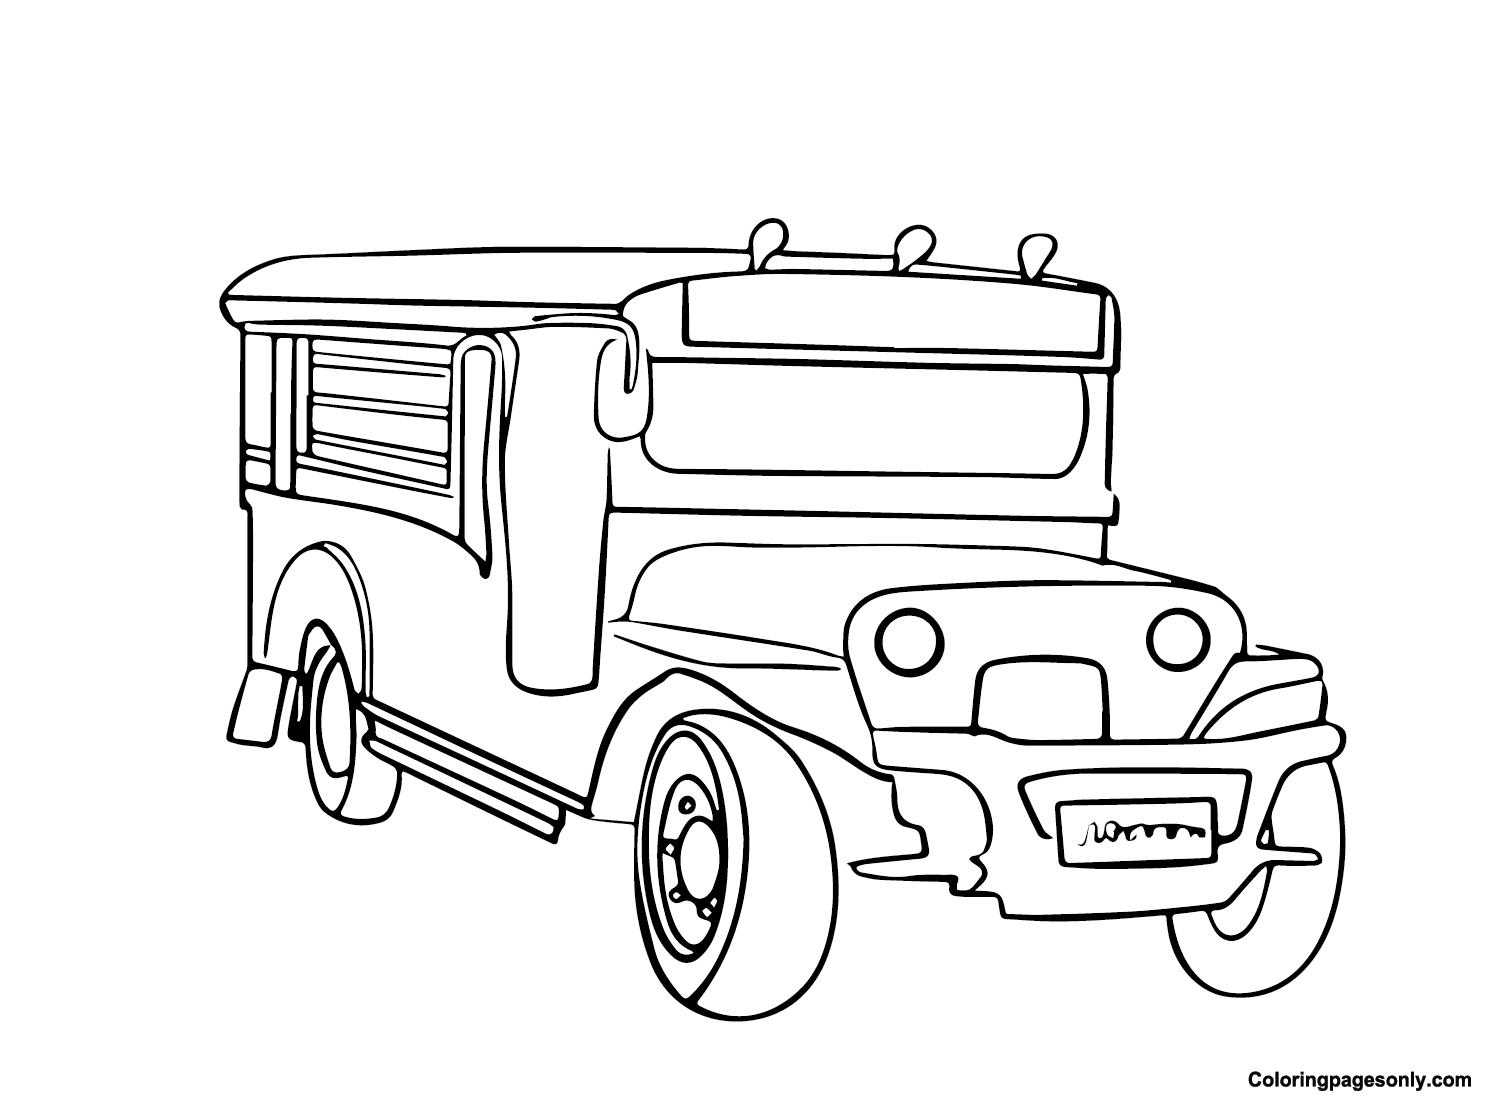 Jeepney coloring pages printable for free download